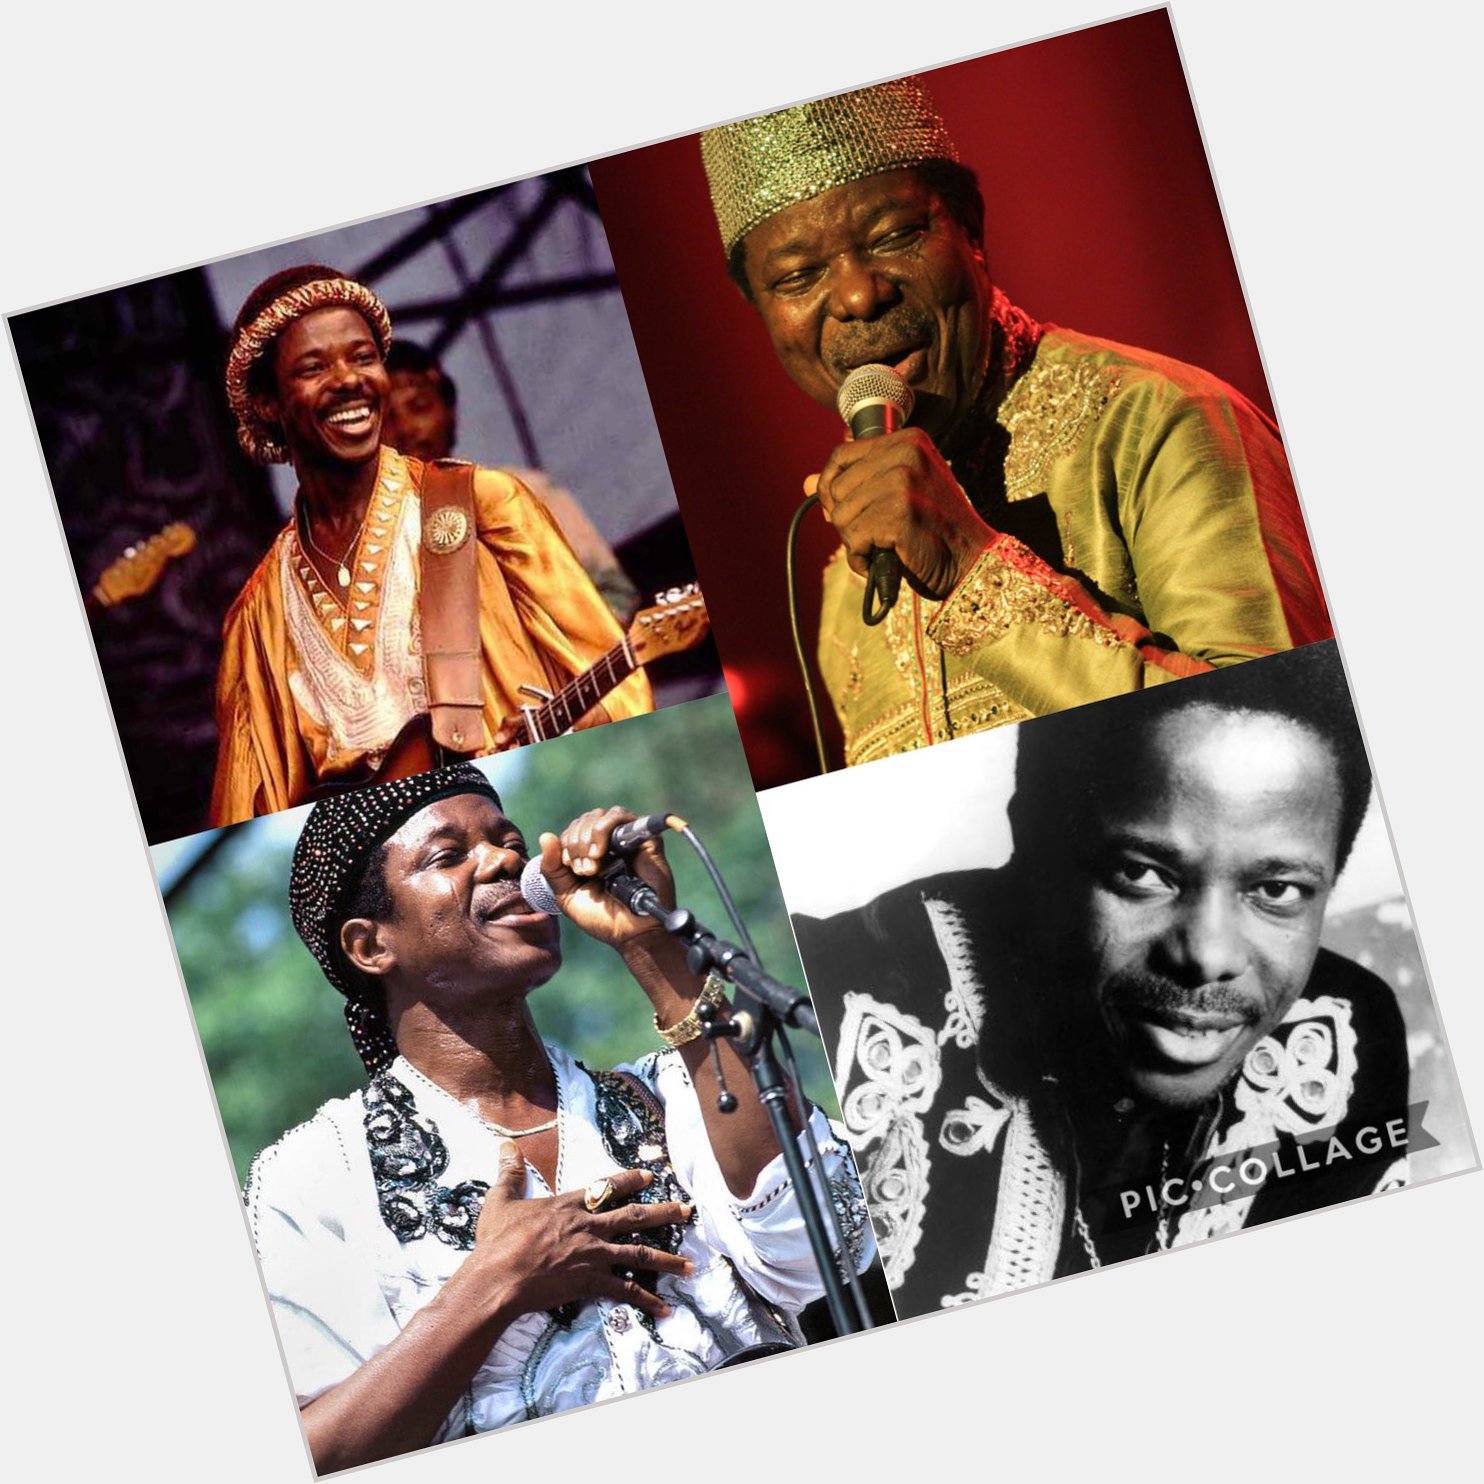 Happy 75th Birthday to the legendary King of Juju music King Sunny Ade 